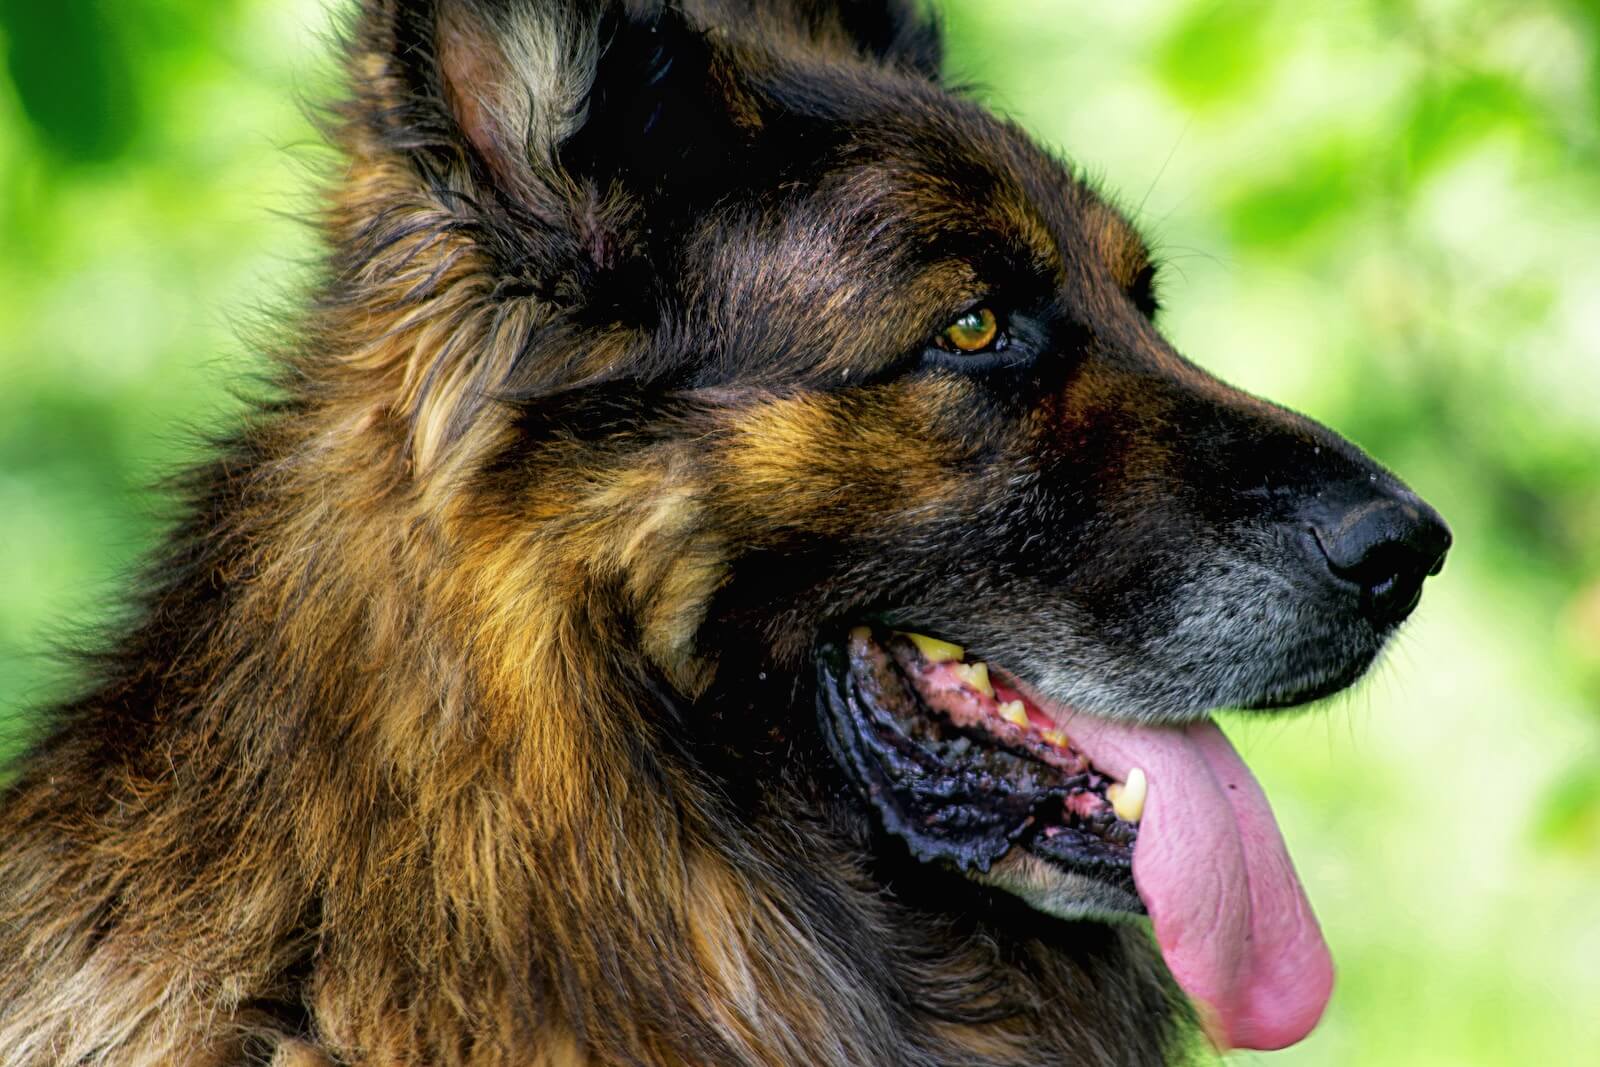 The 7 Most Protective Dog Breeds